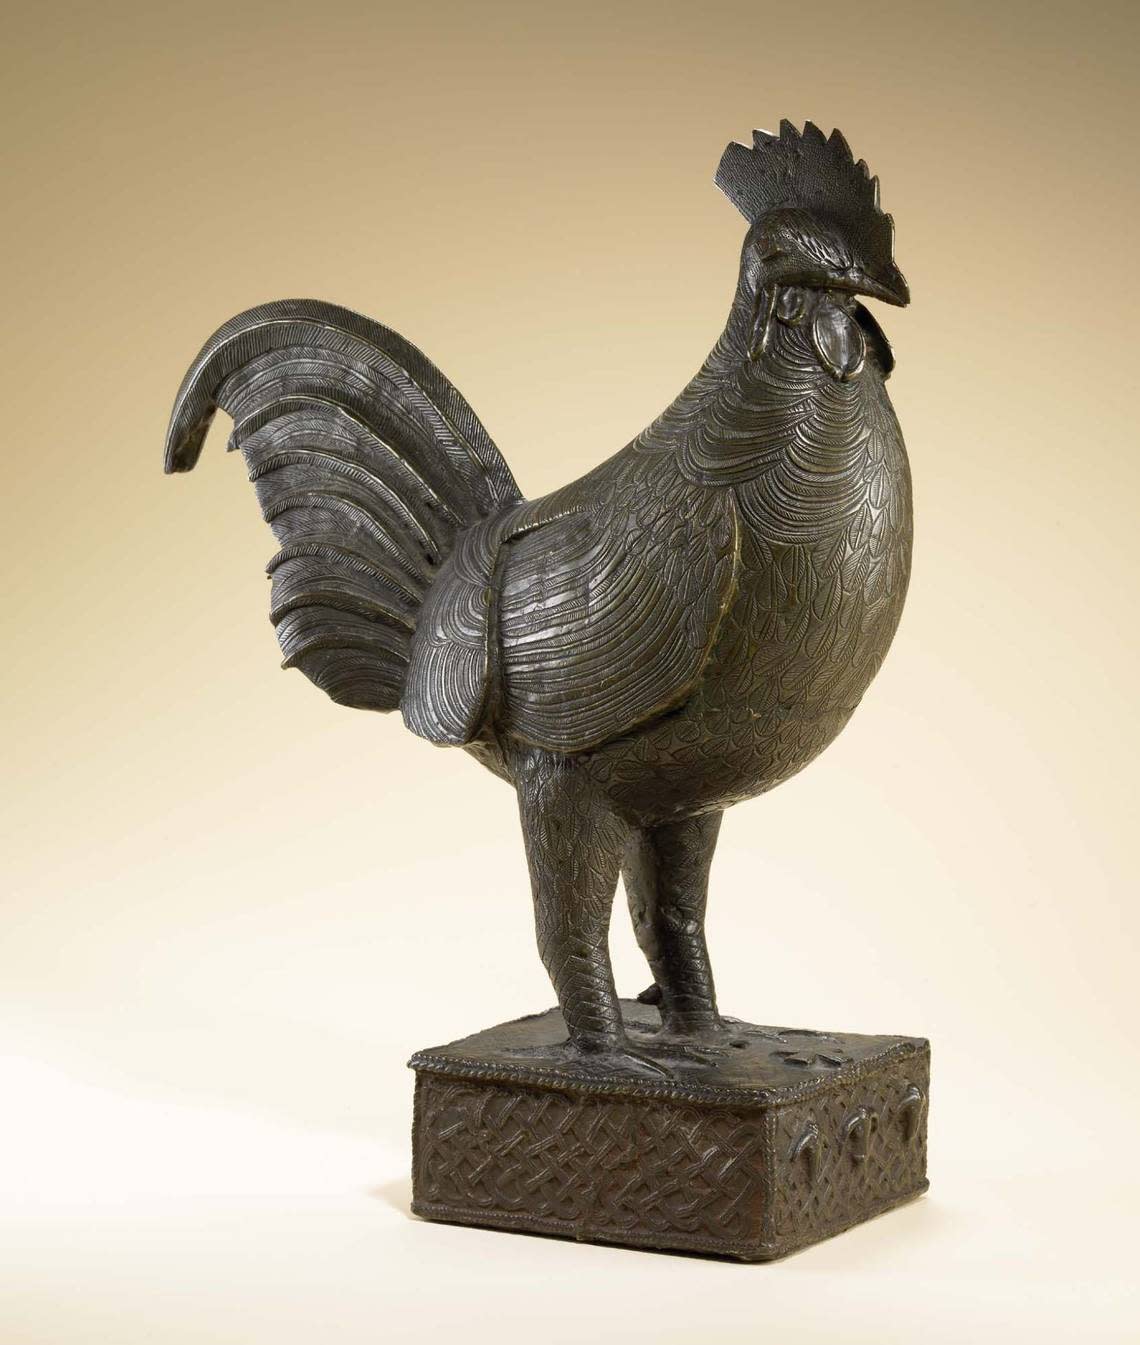 Rooster figure made by an Edo artist in the 18th century with three cows or ram heads on the front of its square base.